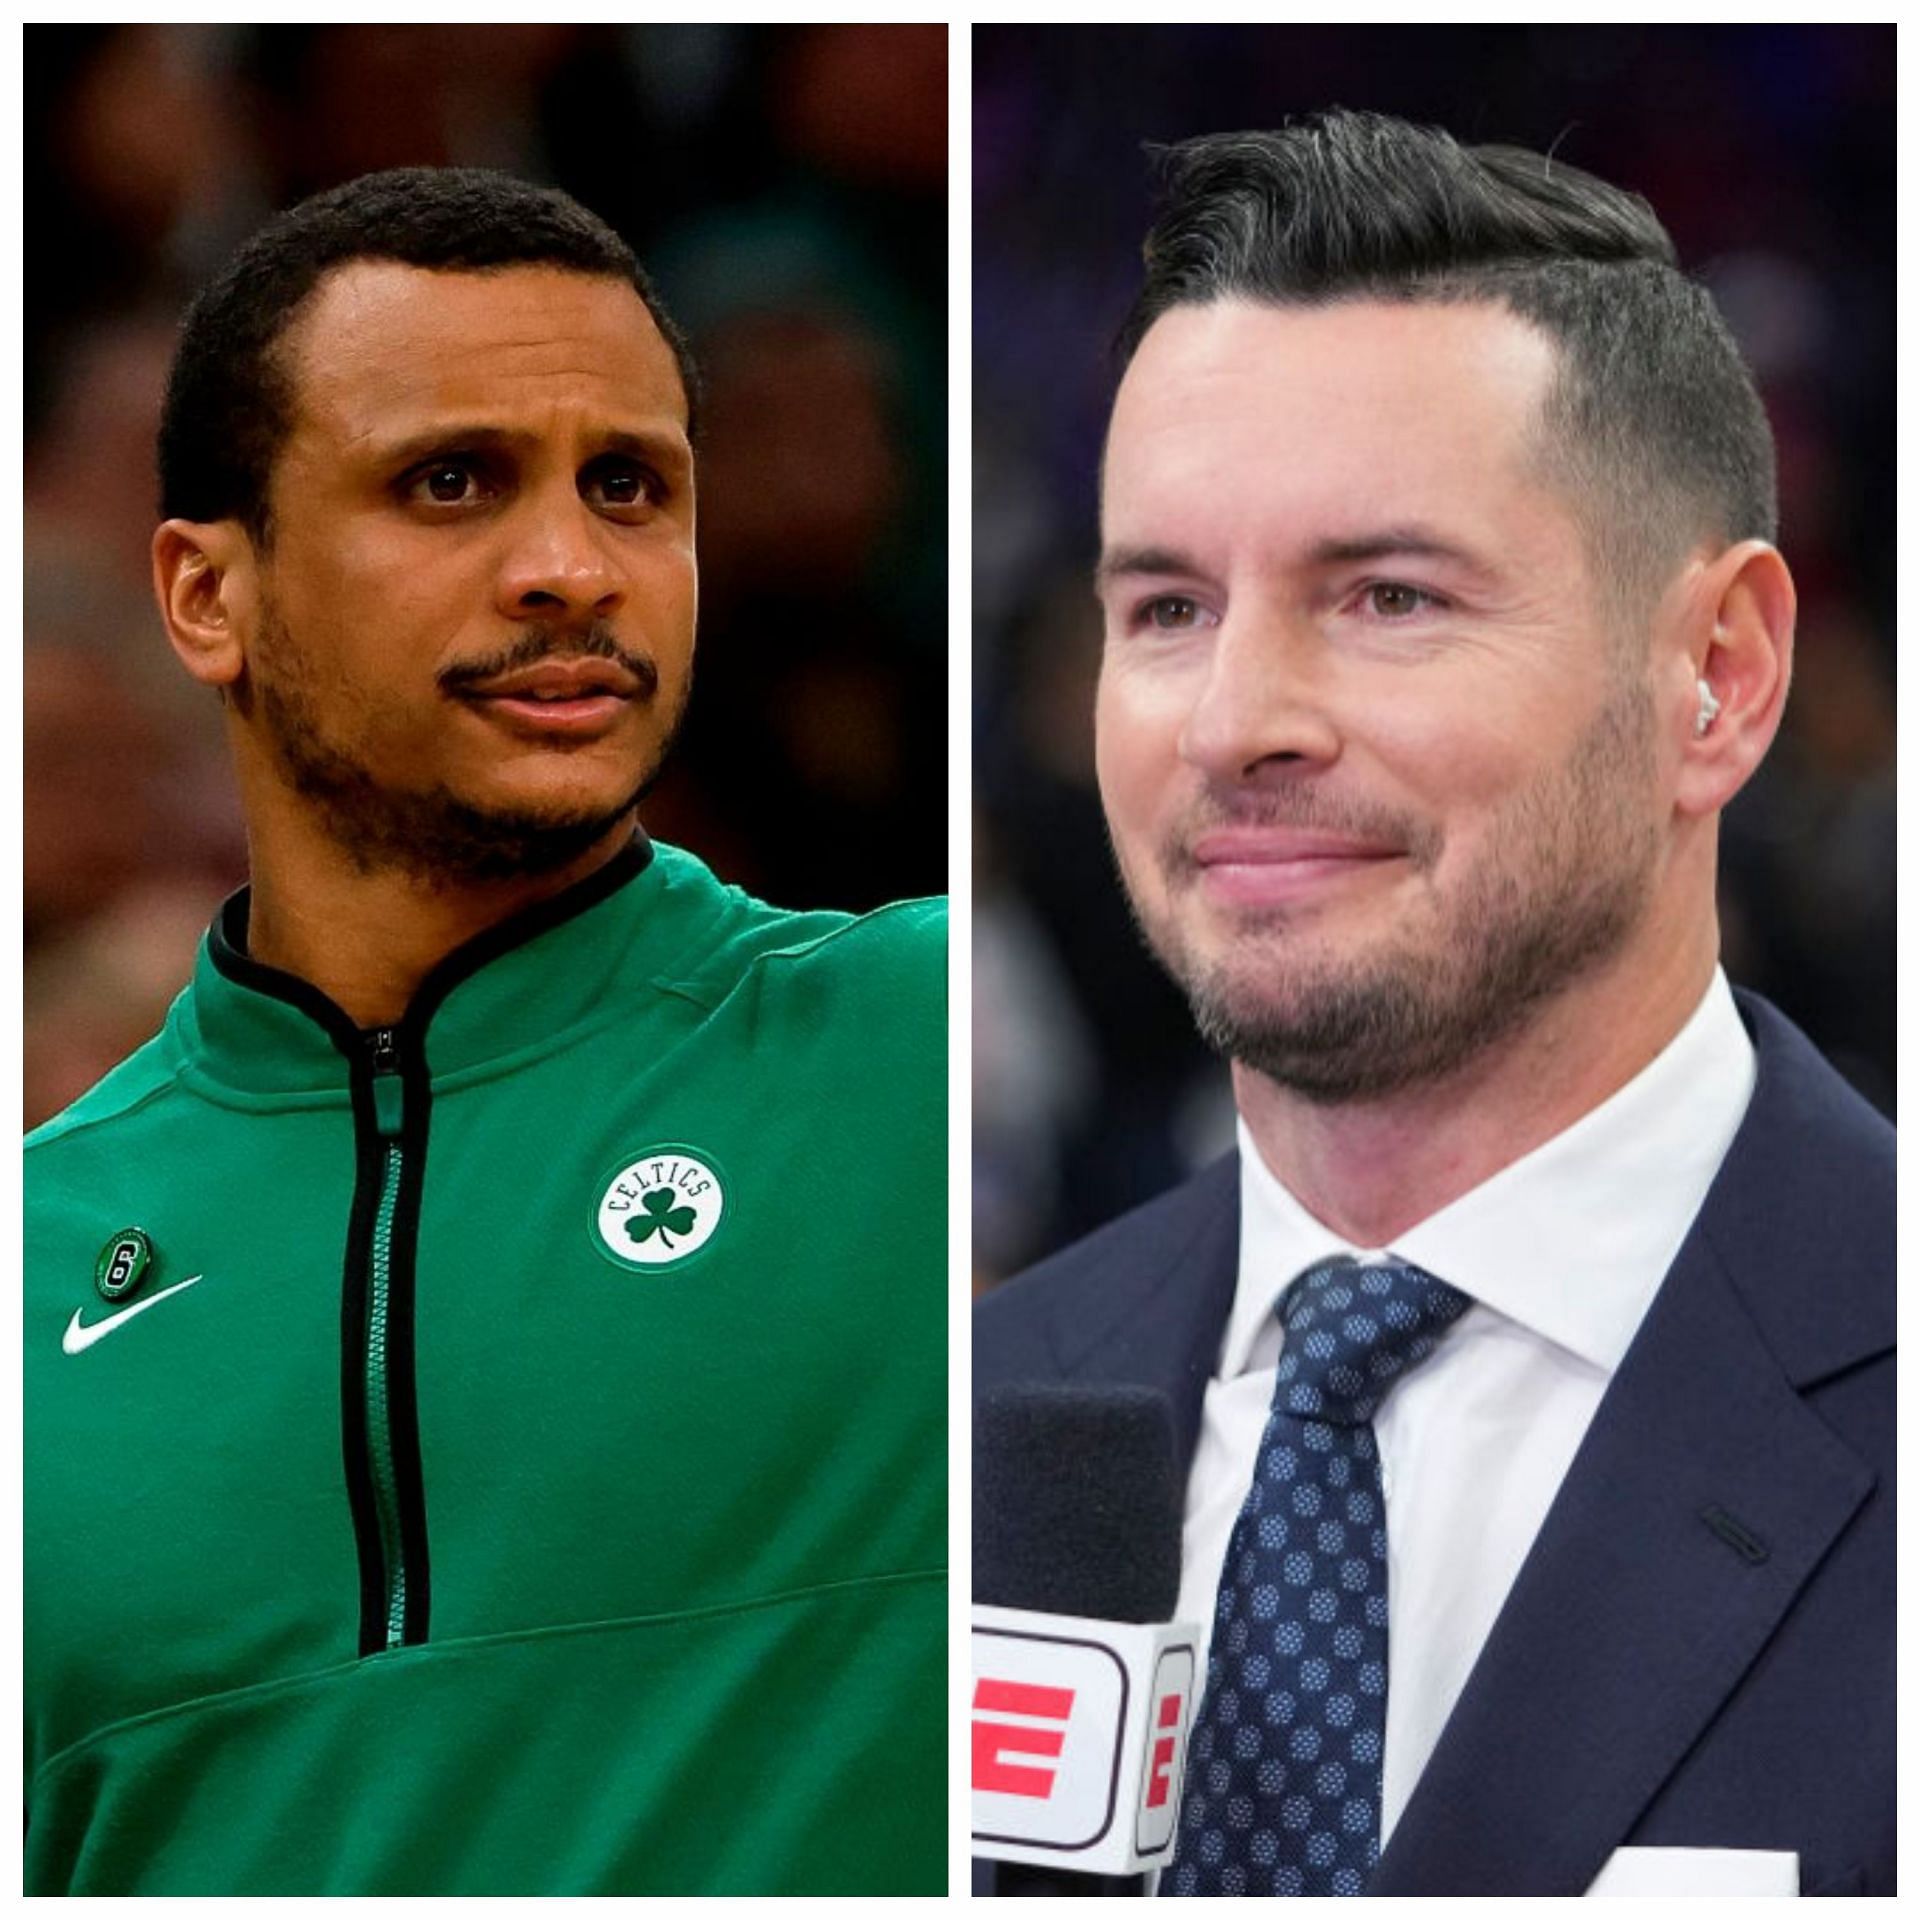 Joe Mazulla gets roasted by JJ Redick, who almost joined Celtics